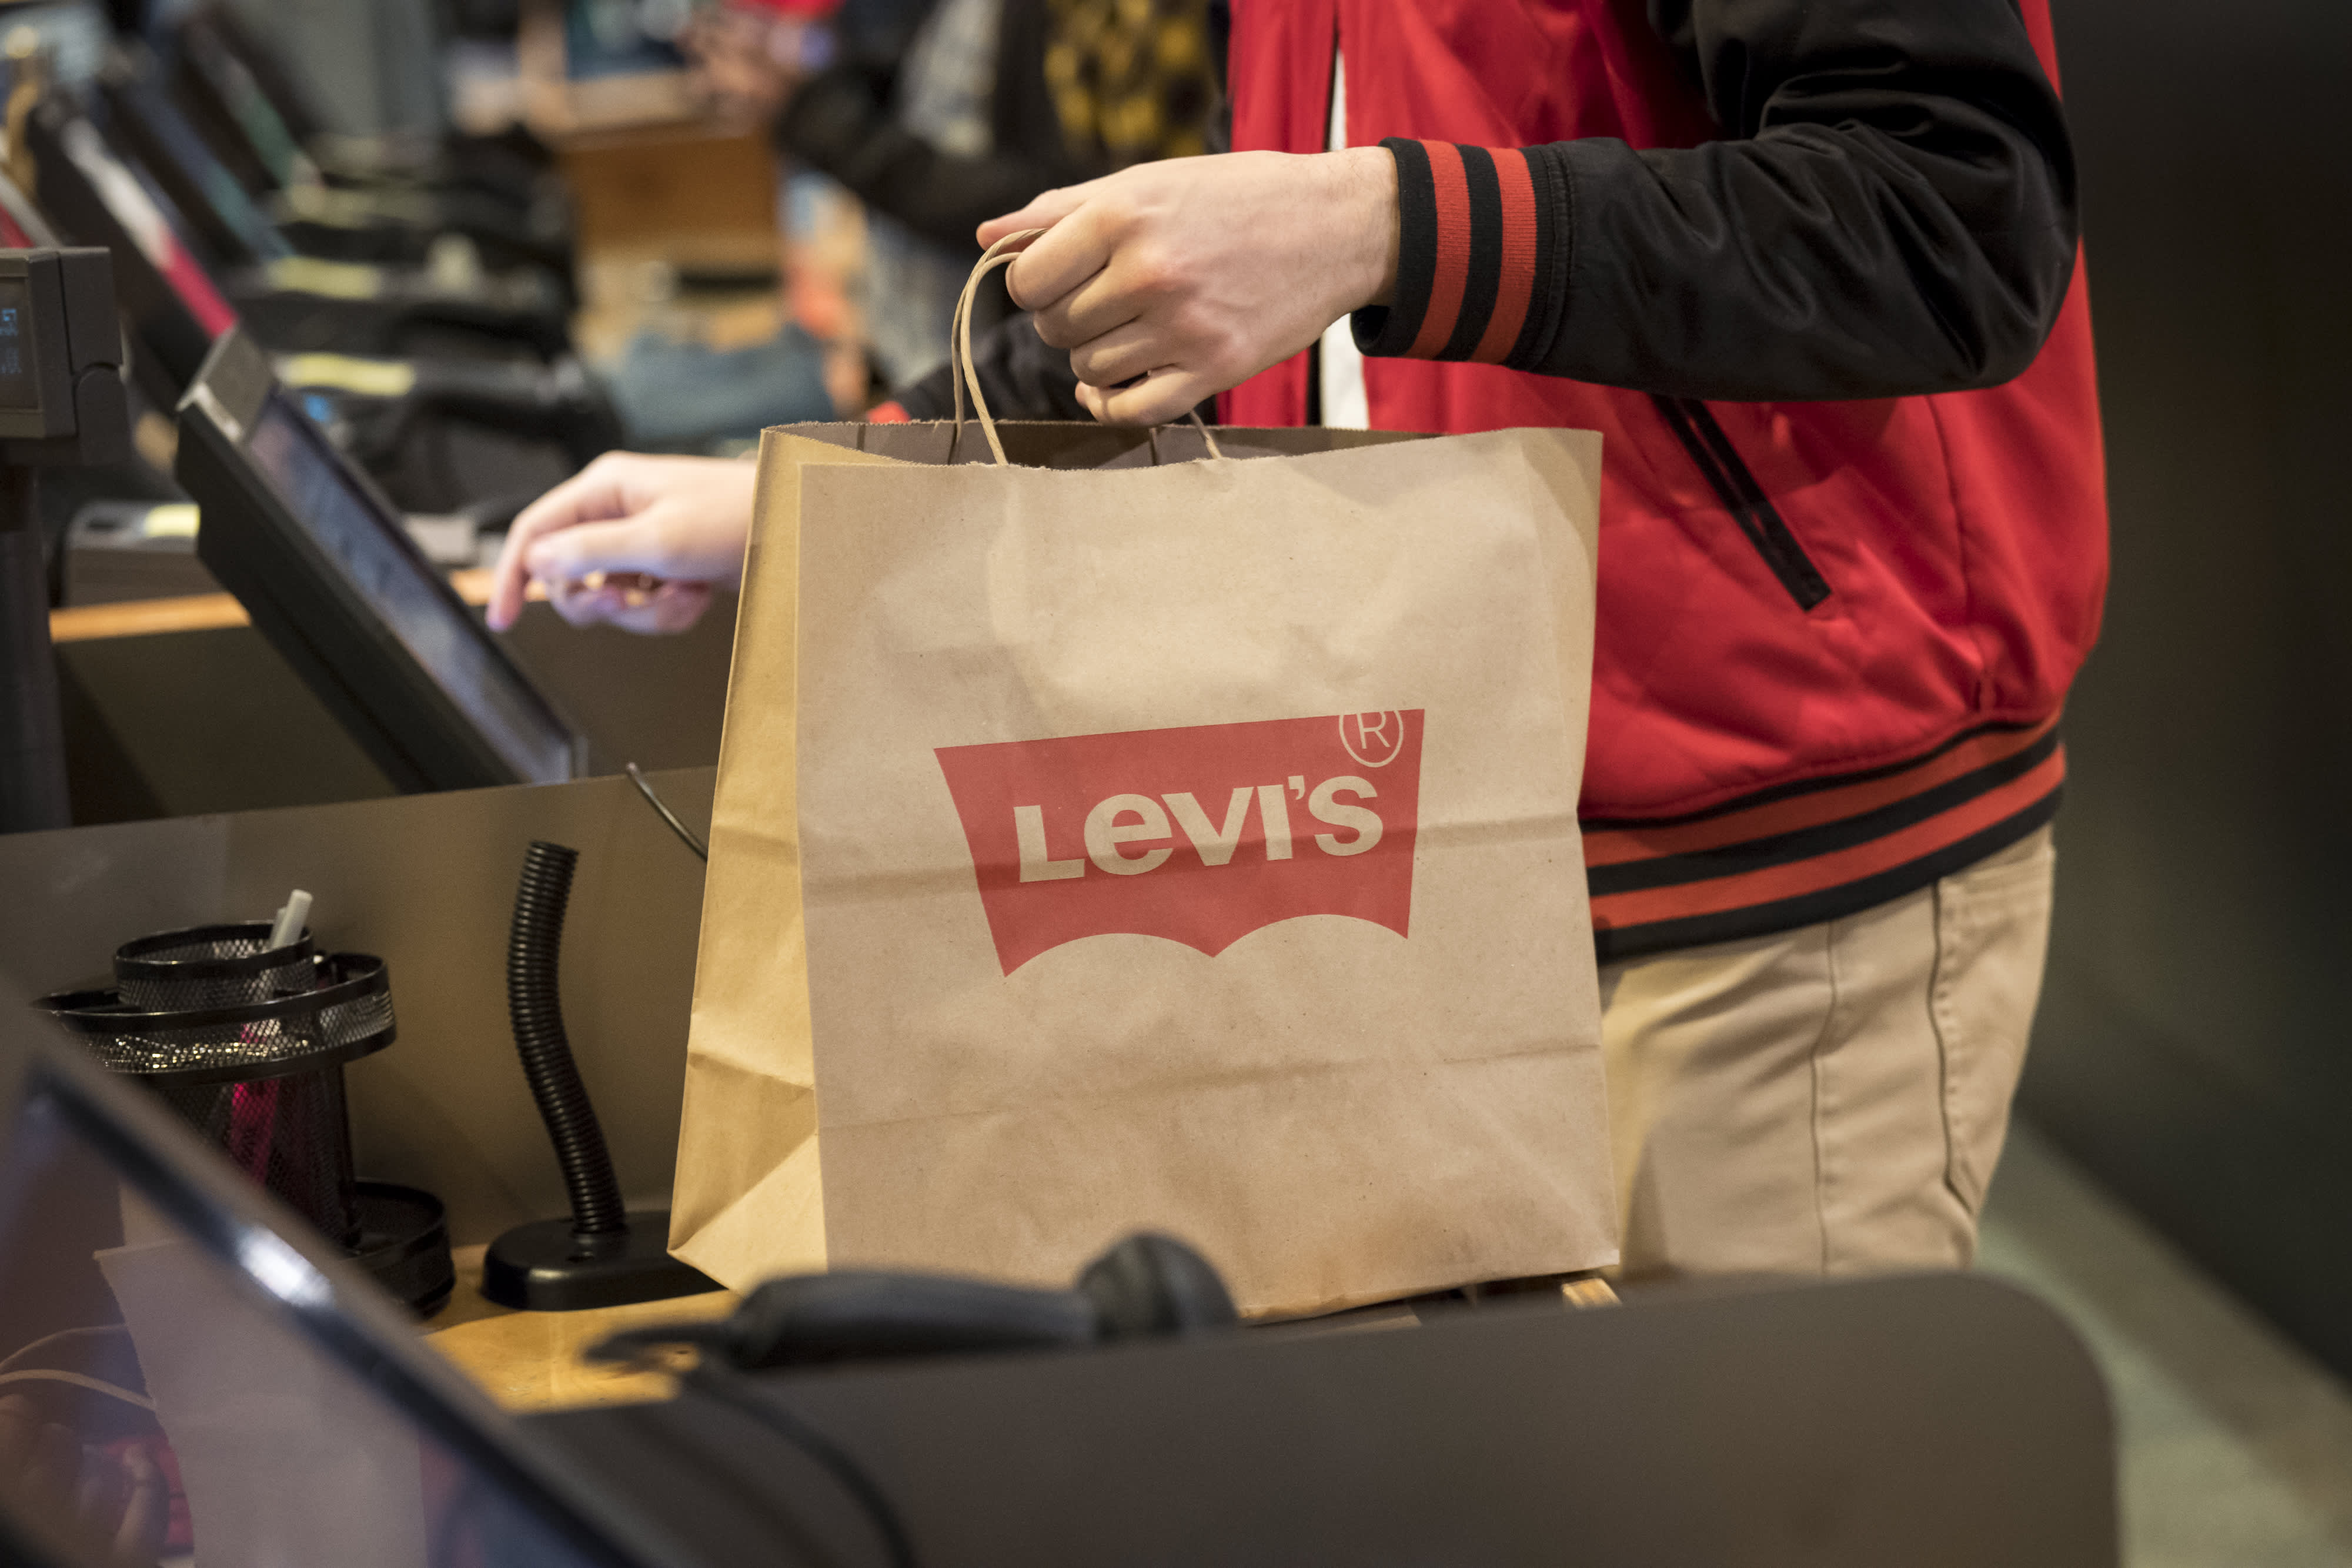 Levi’s (LEVI) reports earnings for the first quarter of 2021